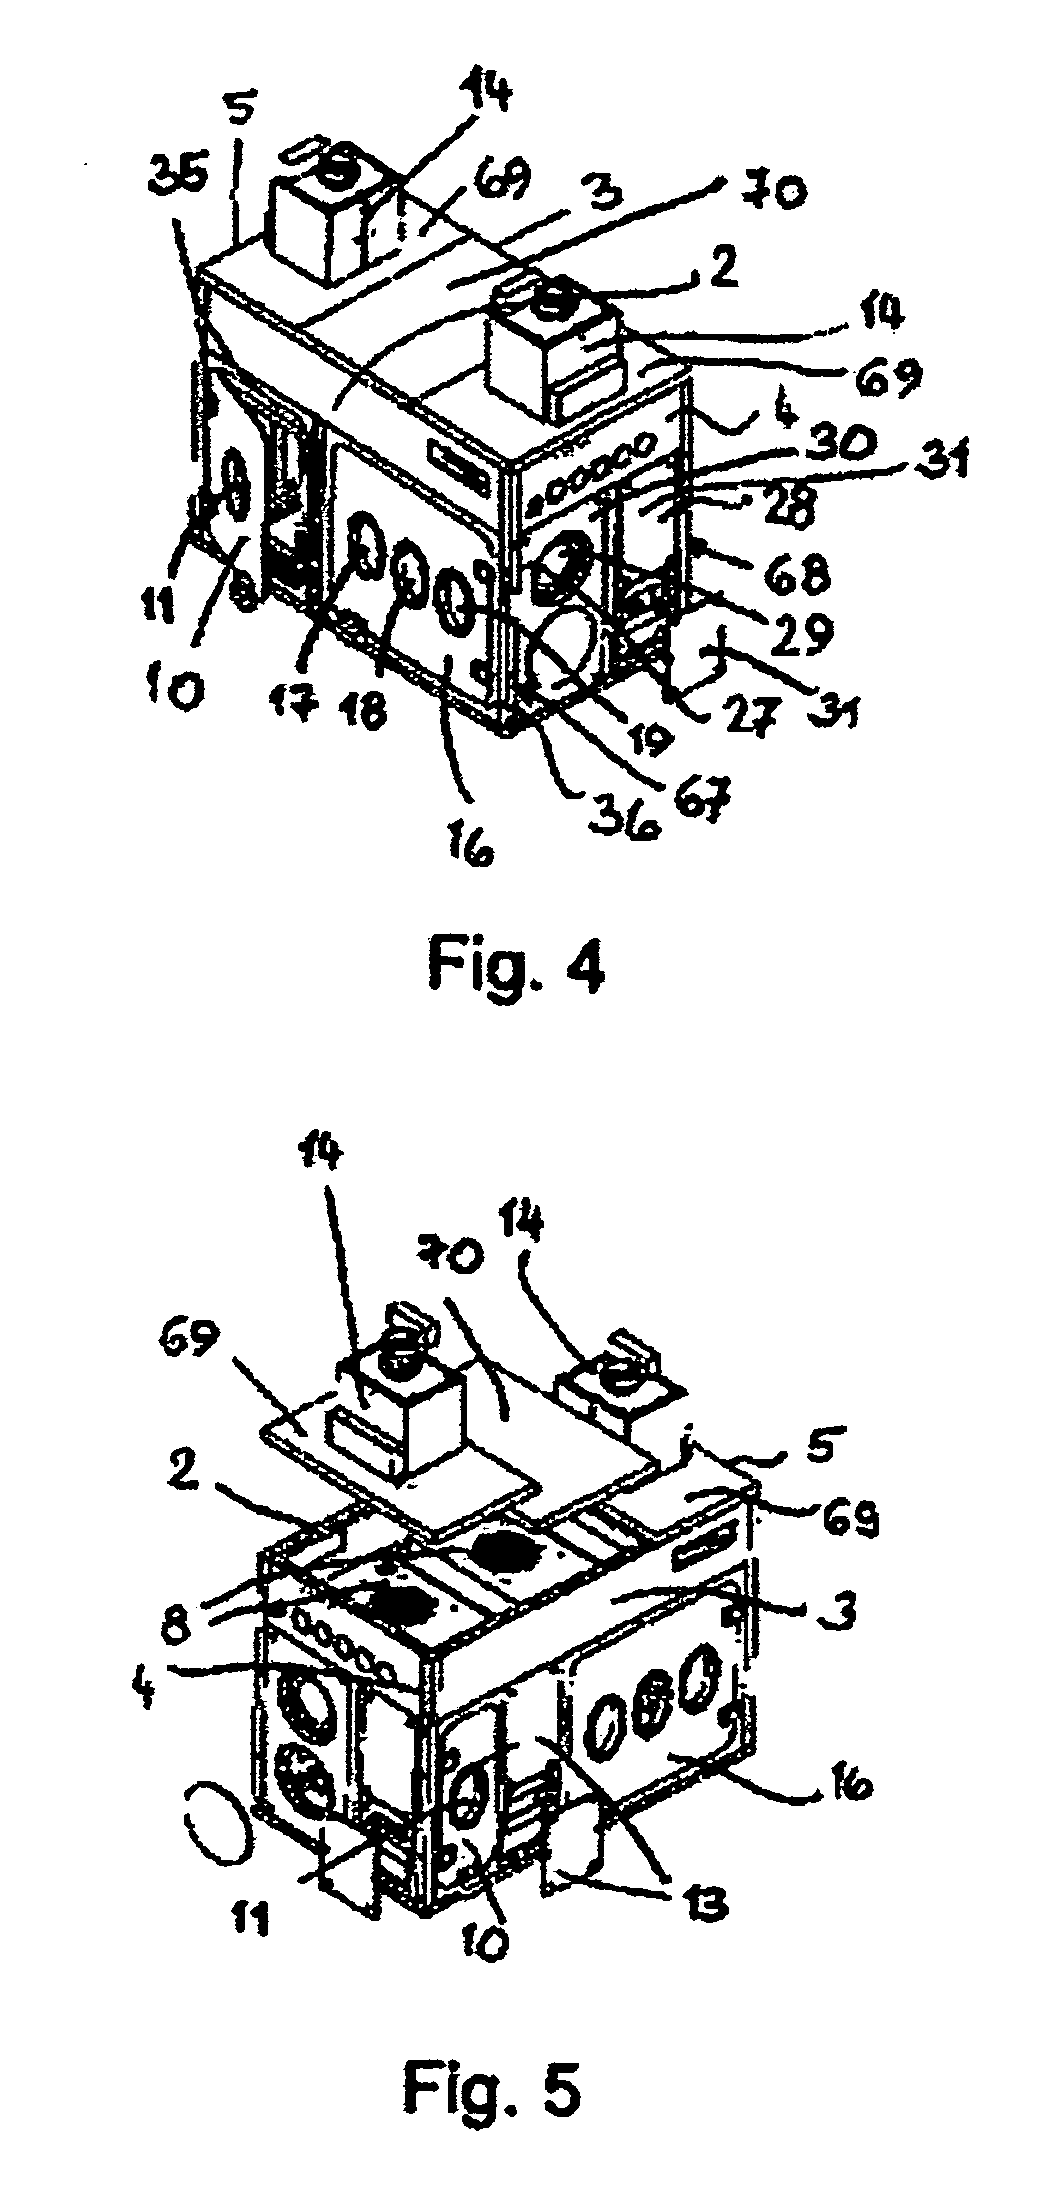 Device for Handling and/or Treating Products